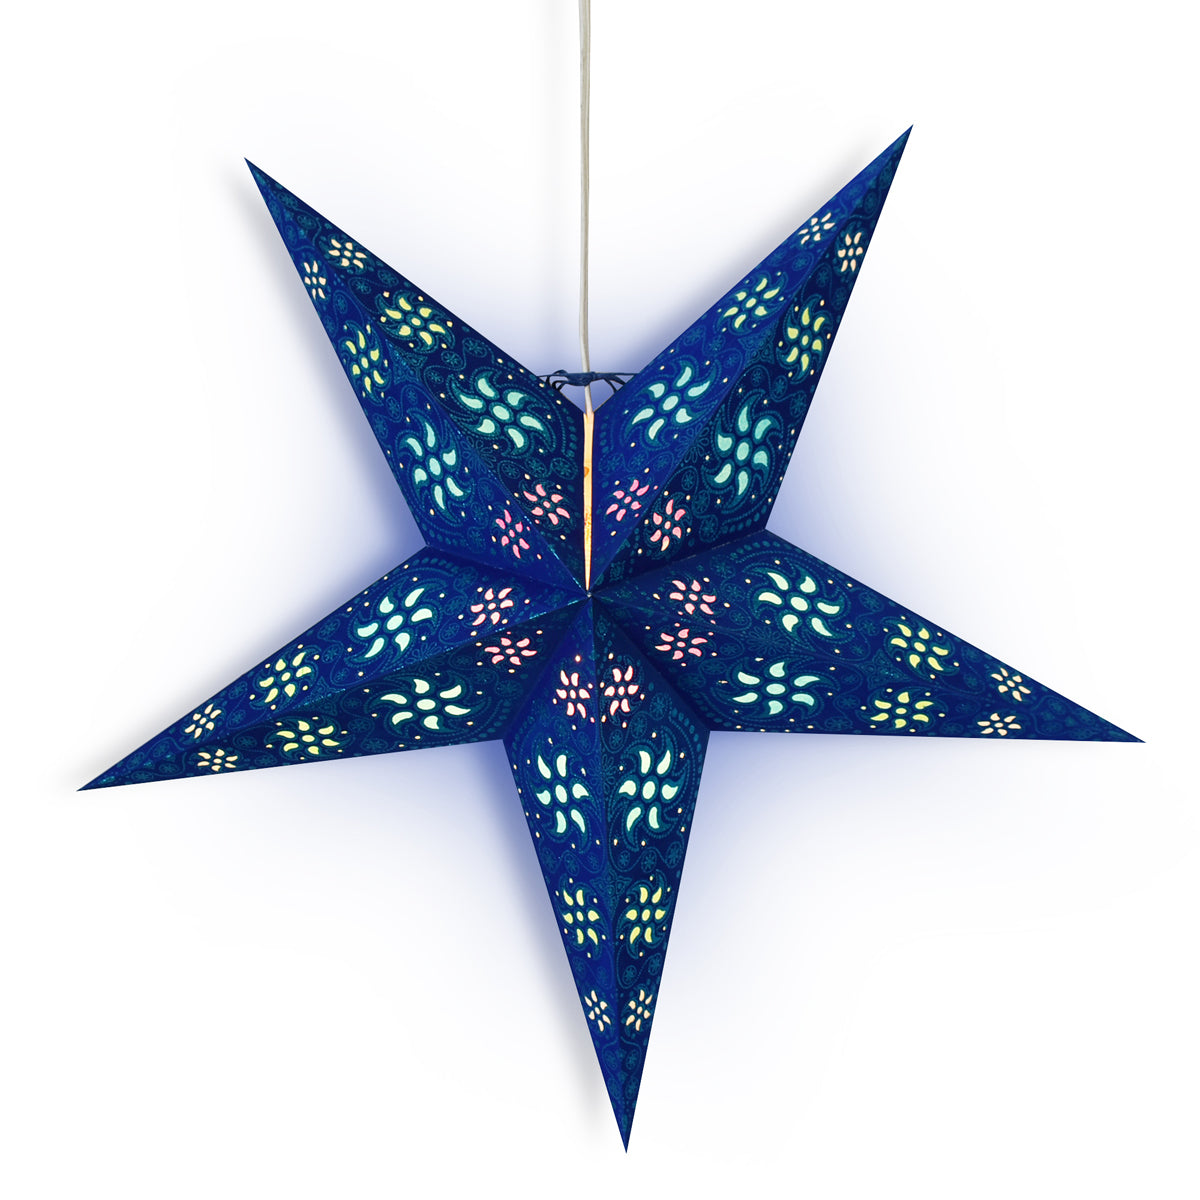 3-PACK + Cord | Dark Blue Winds Glitter 24&quot; Illuminated Paper Star Lanterns and Lamp Cord Hanging Decorations - PaperLanternStore.com - Paper Lanterns, Decor, Party Lights &amp; More